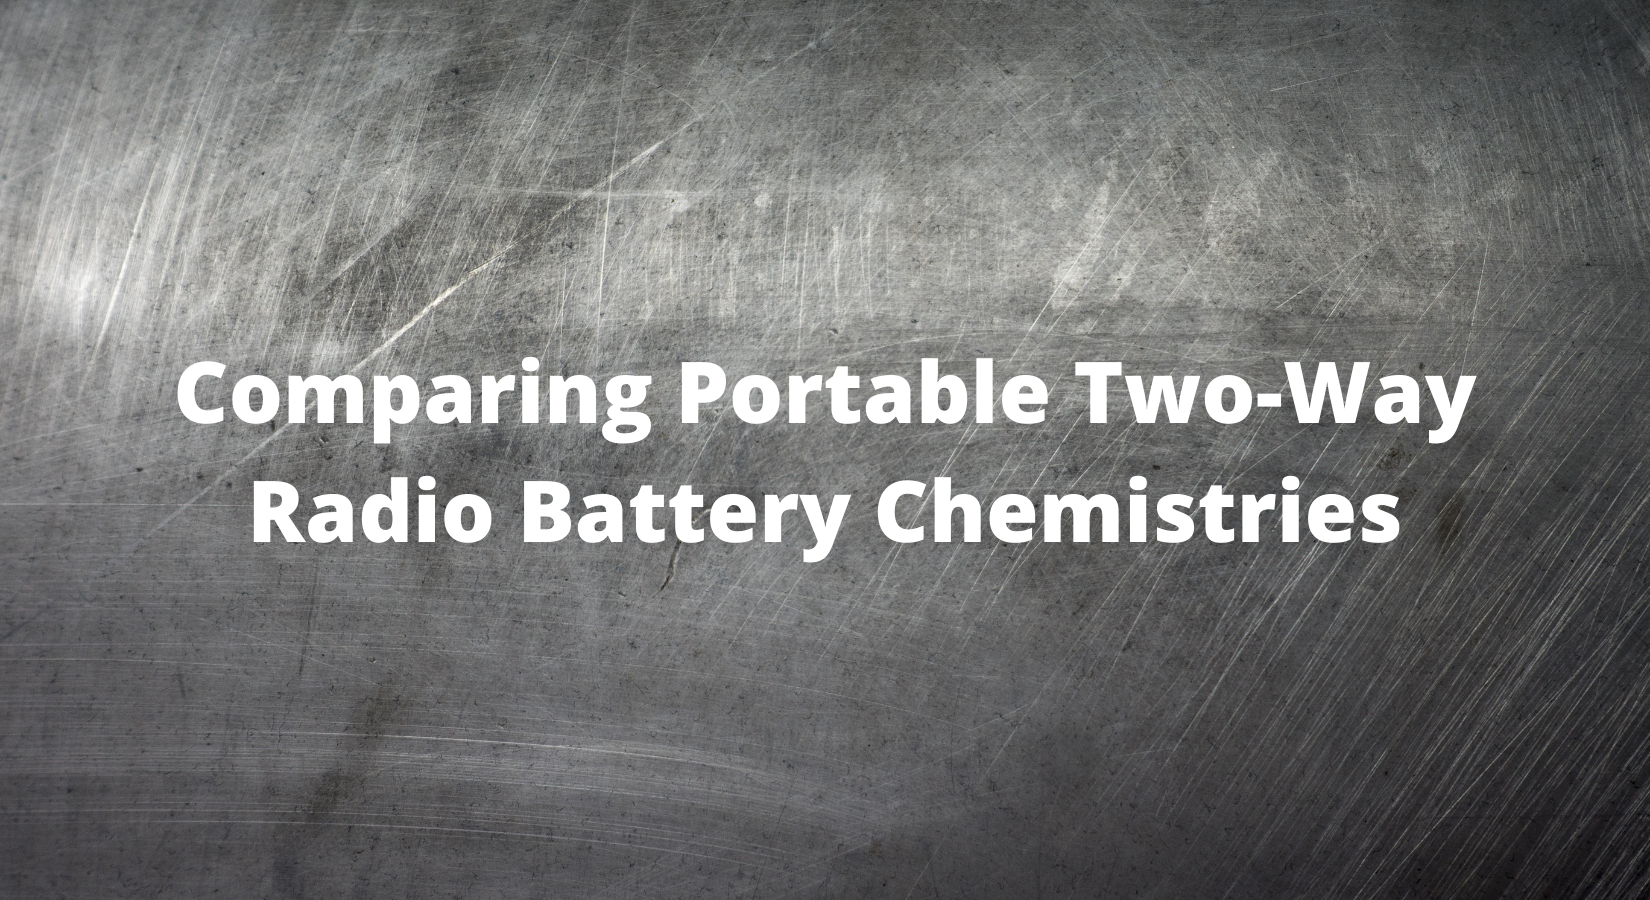 Comparing Portable Two-Way Radio Battery Chemistries